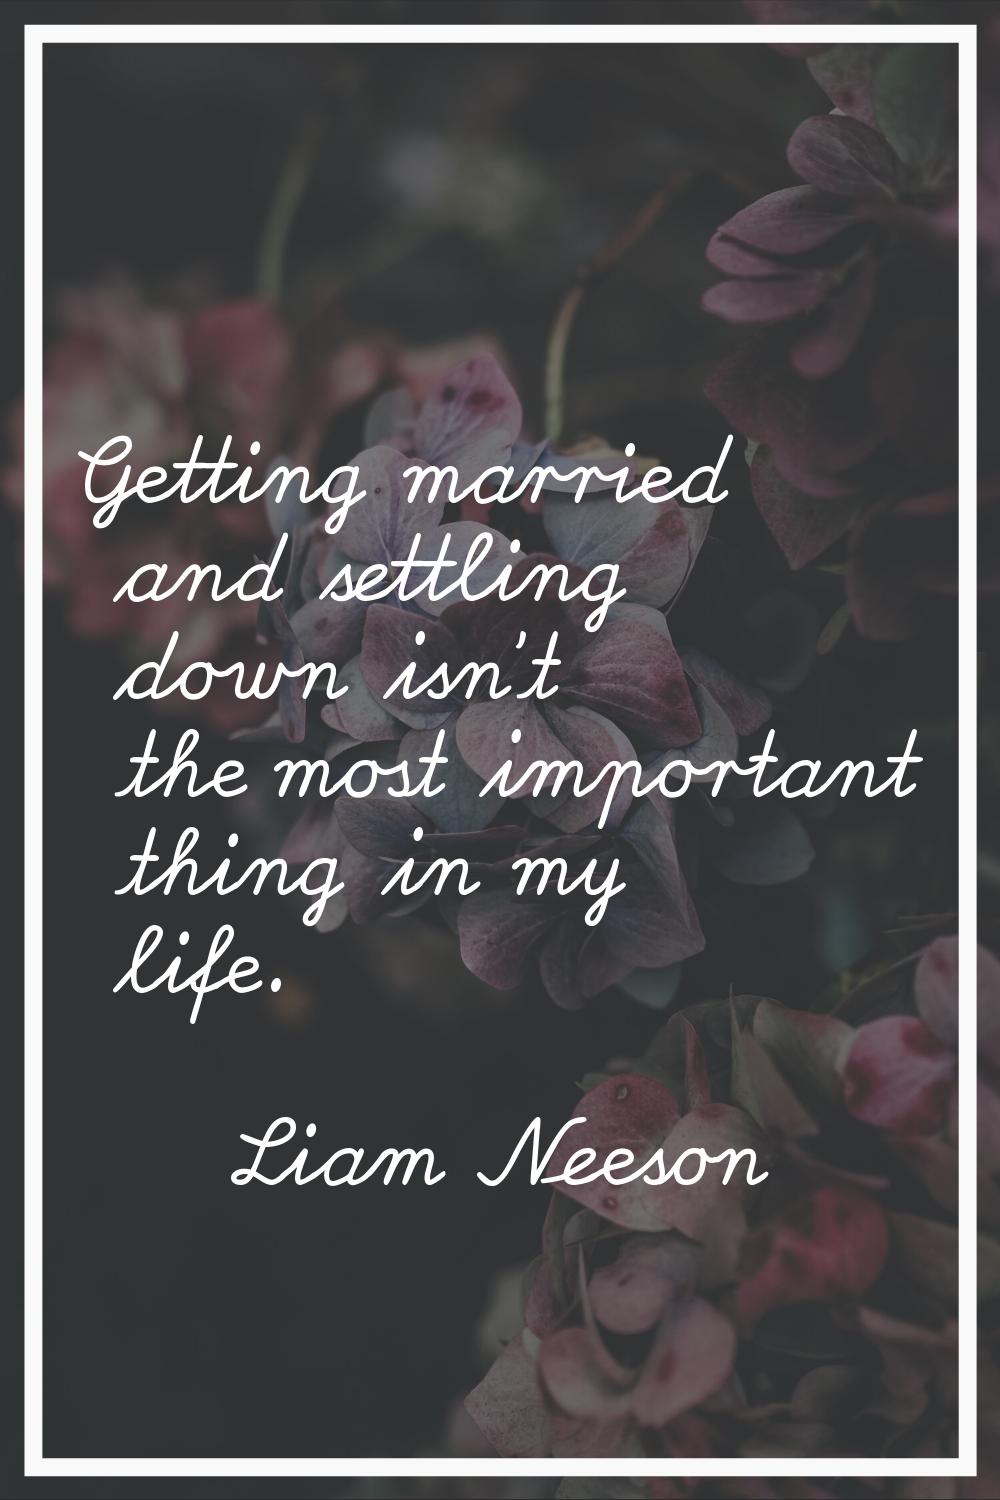 Getting married and settling down isn't the most important thing in my life.